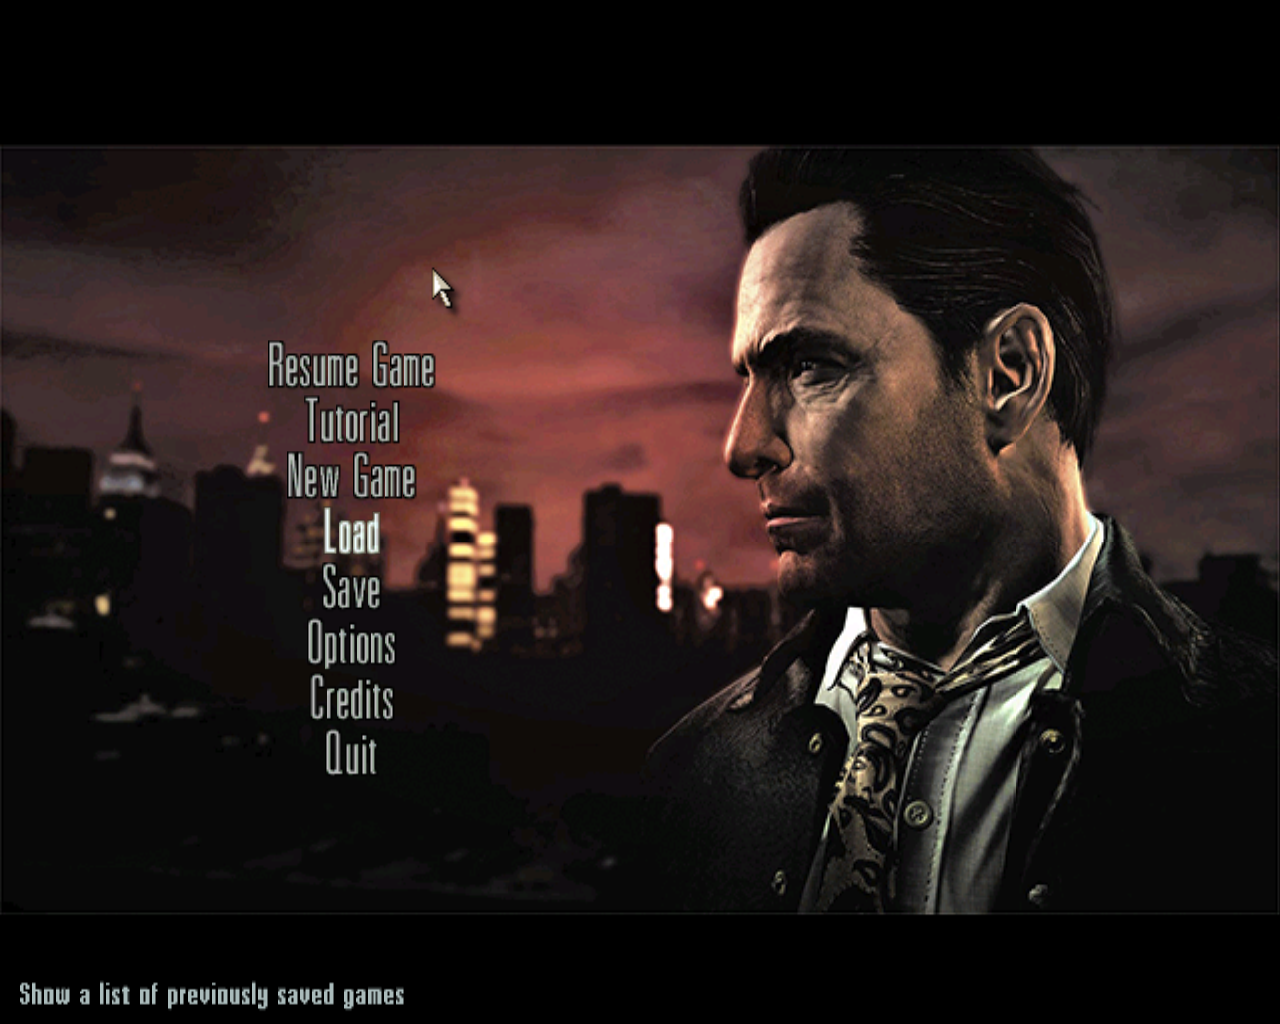 Max Payne 3' new images released